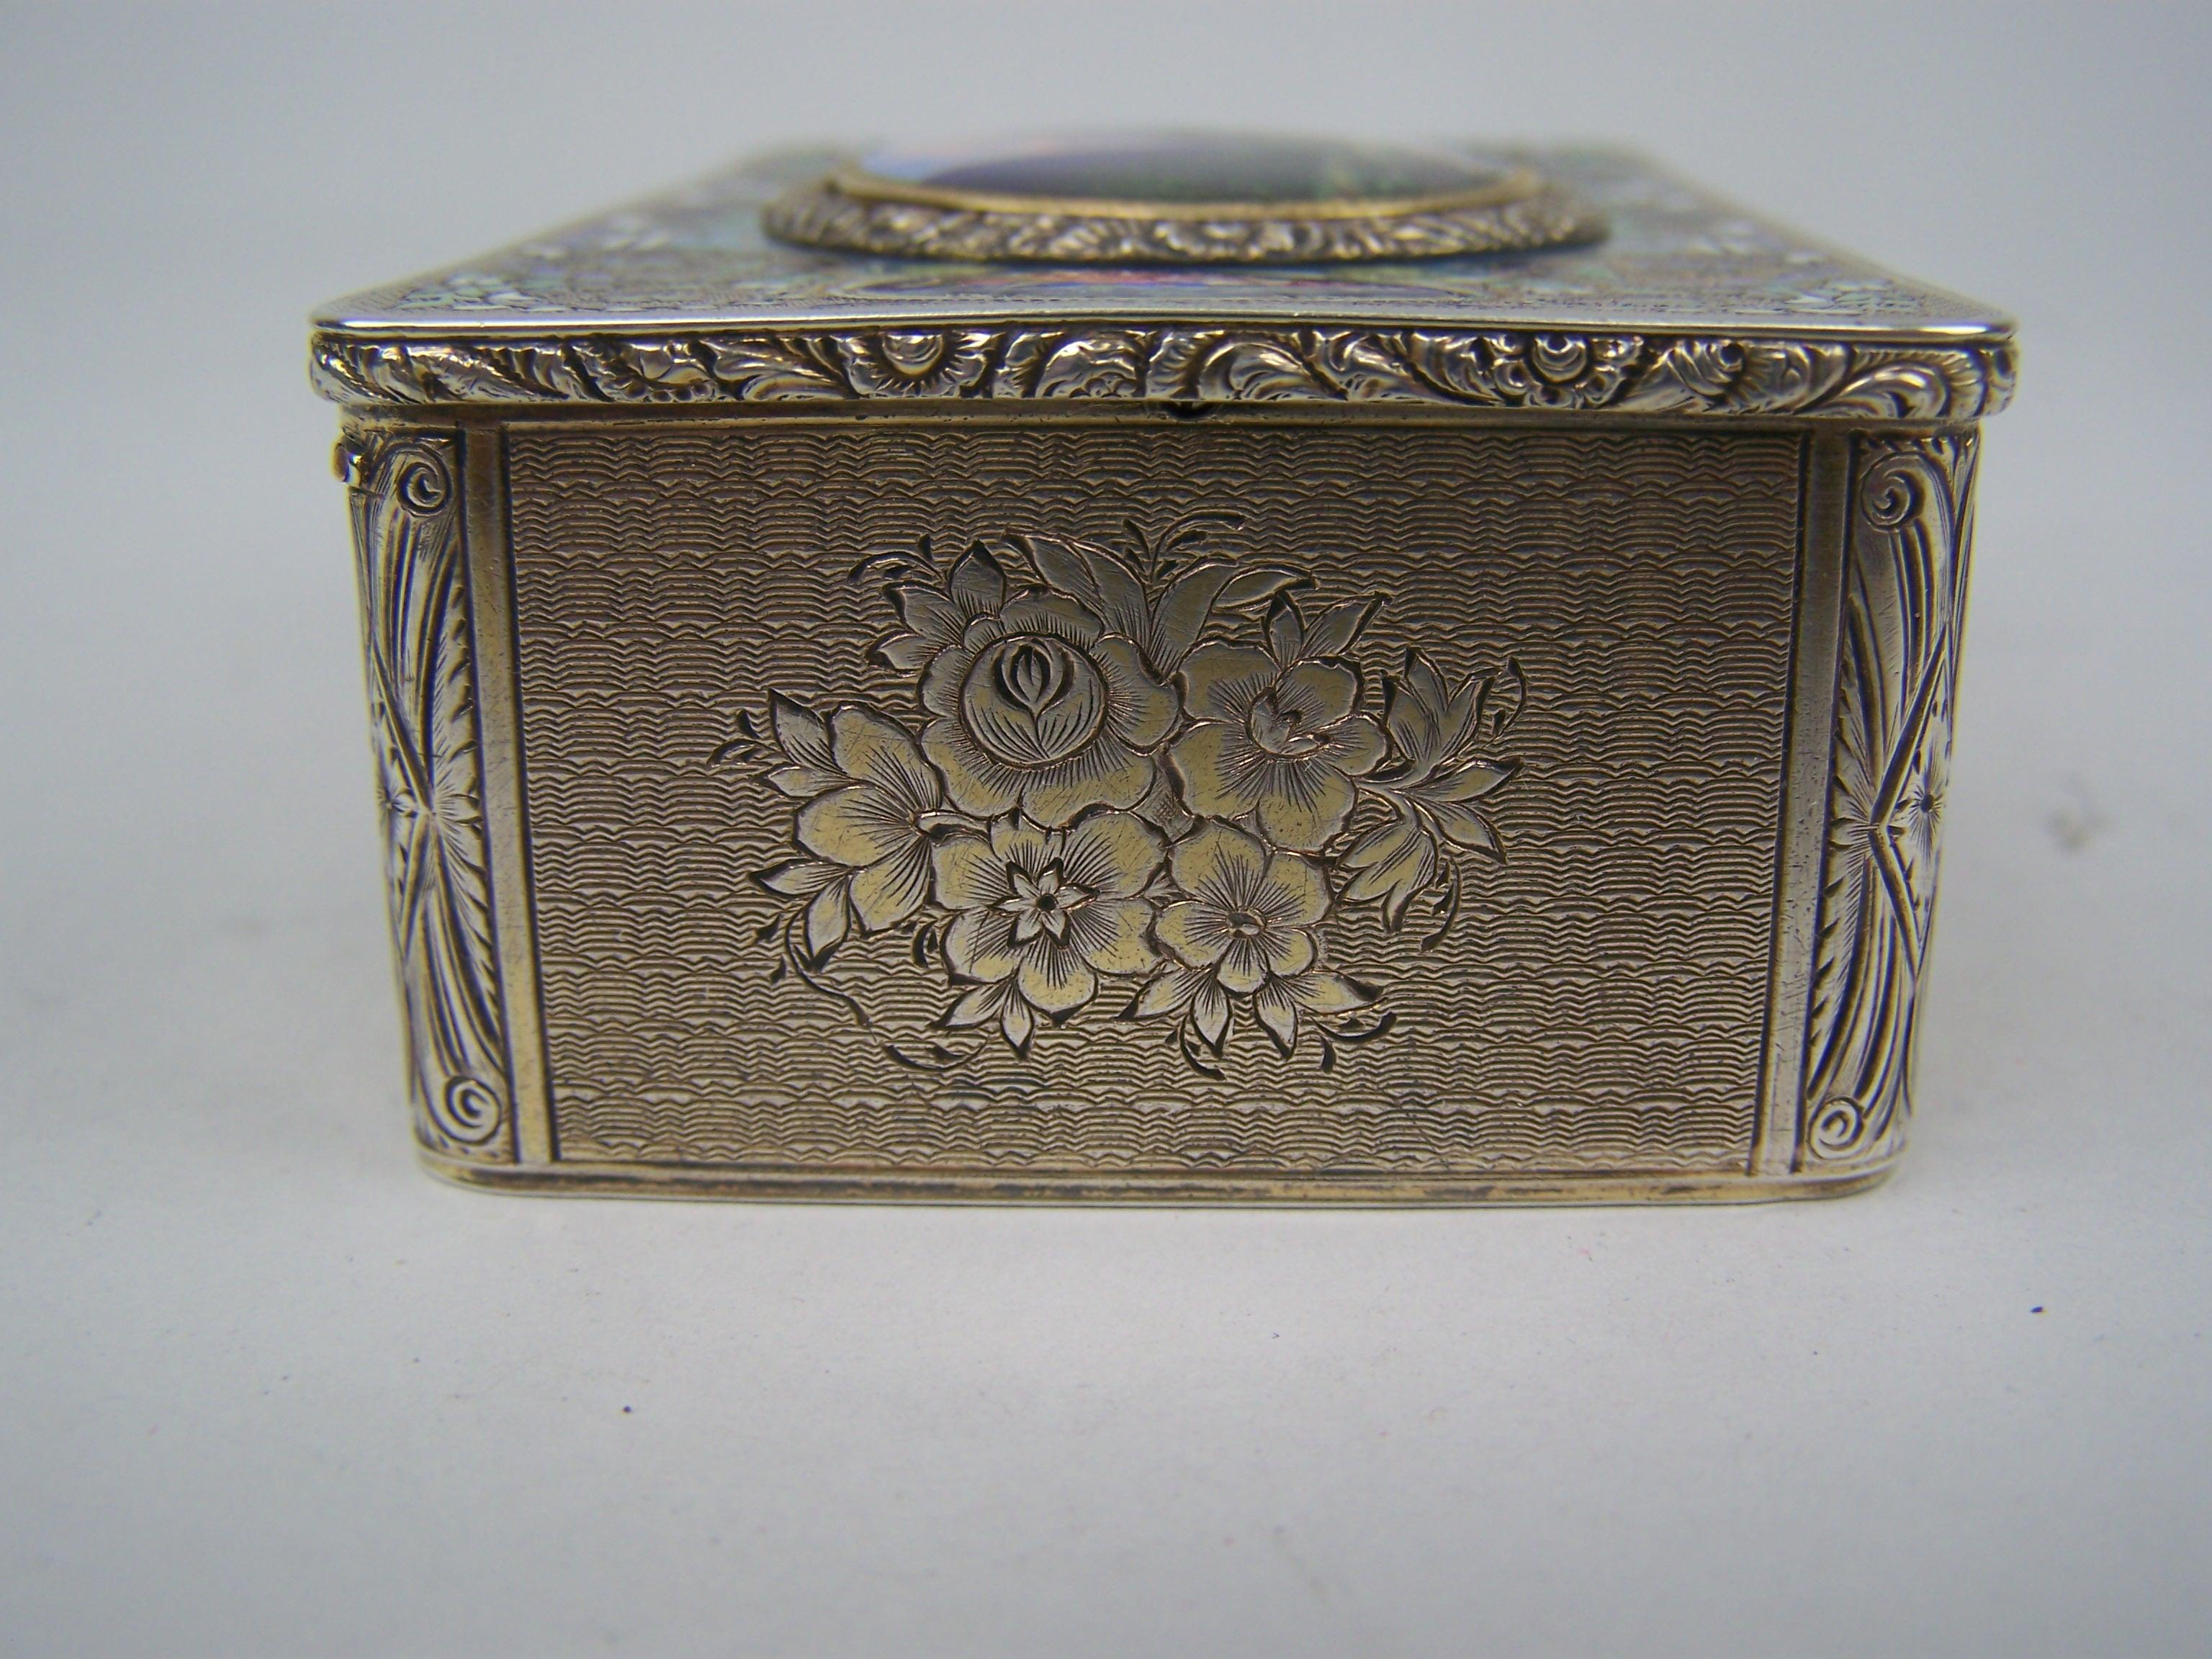 Singing bird box by Bruguier in silver case with enamel to top and lid For Sale 2